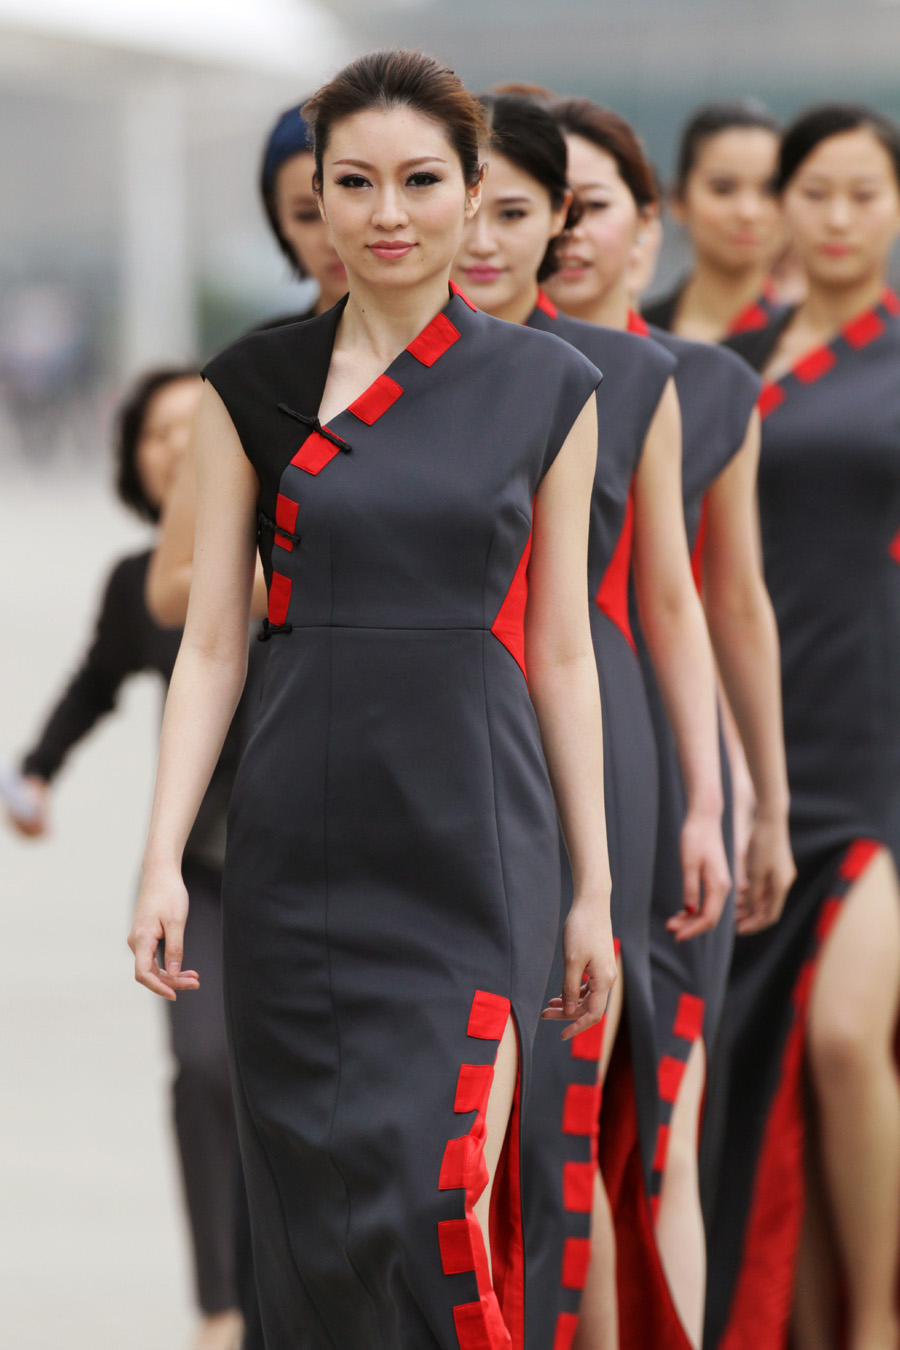 Grid girls at the Chinese Grand Prix